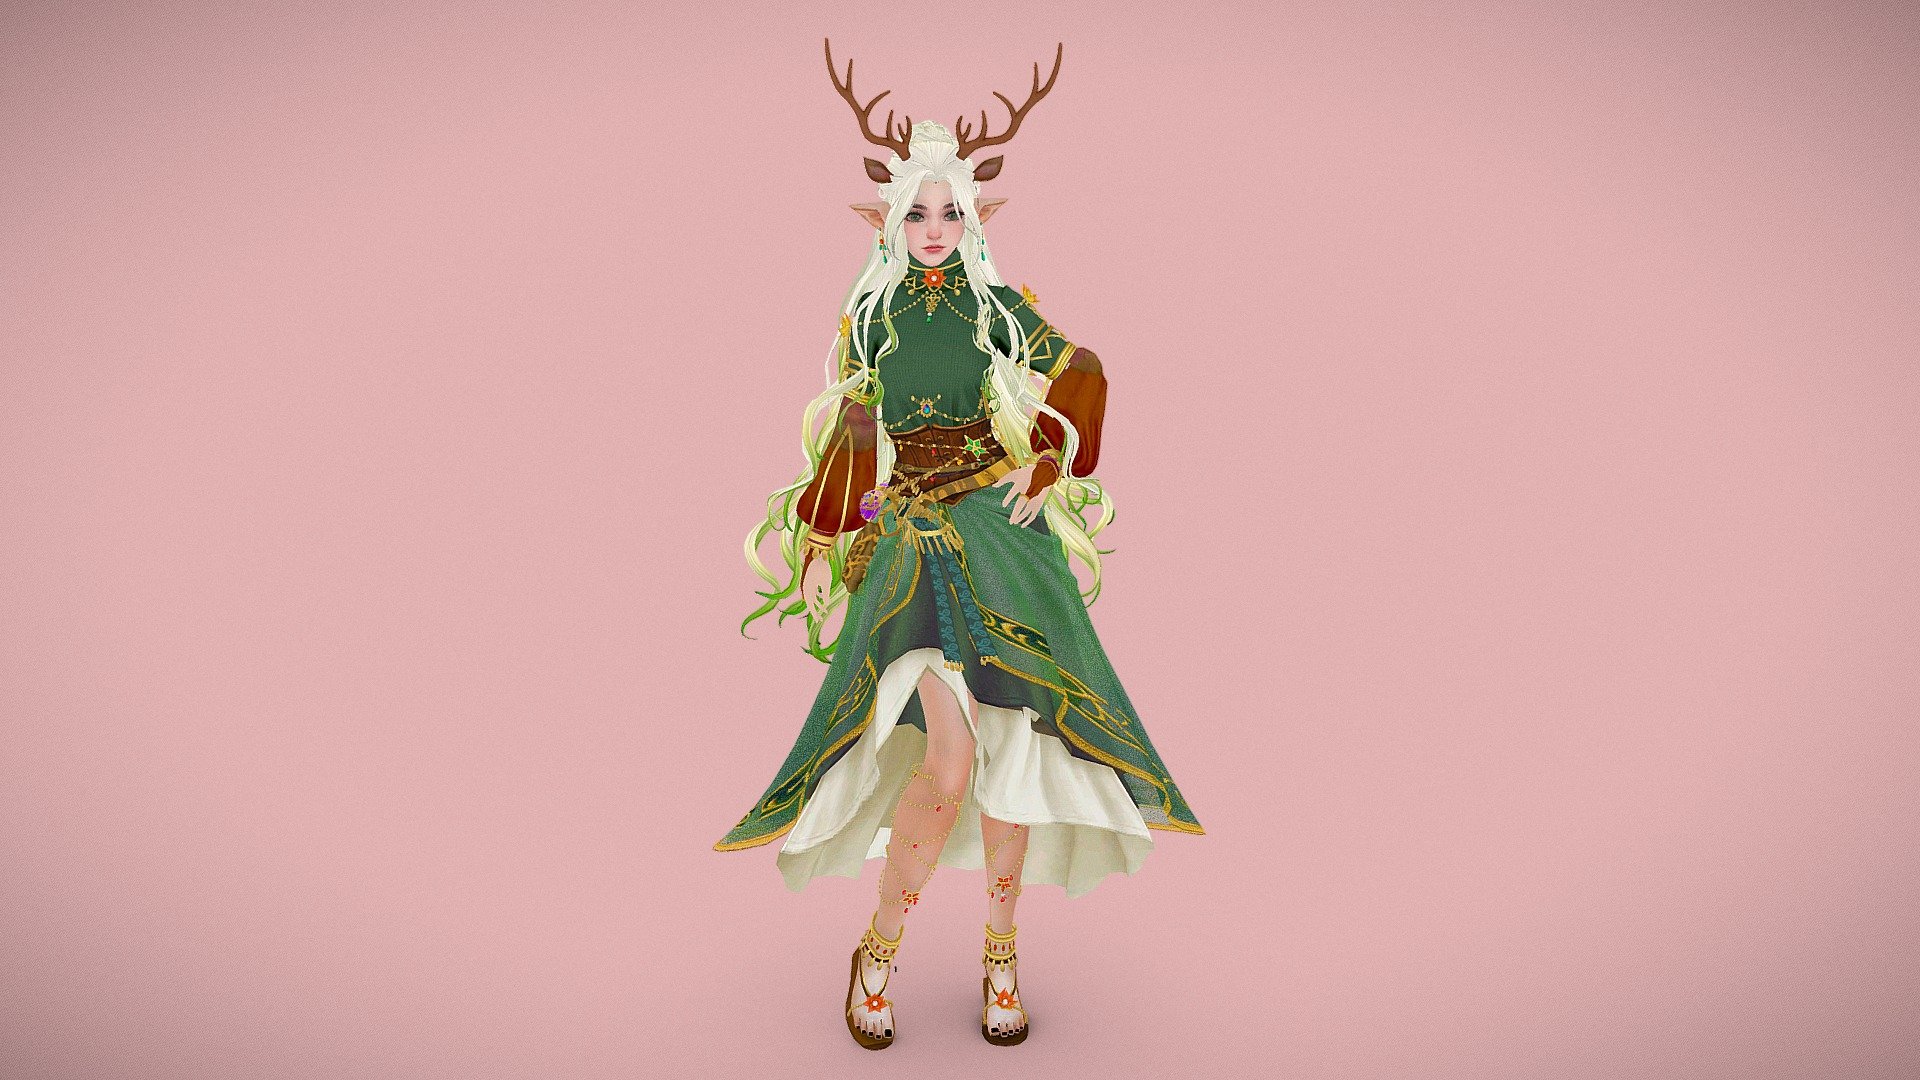 Immerse yourself in a mystical world with Ghzala, the Guardian of the Dream Forest. This graceful creature with white hair and enchanting green eyes comes to life with carefully crafted animation and flawless rigging.

Ghzala is adorned in a princess outfit inspired by nature, adorned with delicate leaves and floral patterns, blending her timeless elegance with the wild beauty of the forest. Every meticulous detail, from the folds of her gown to the subtle shades of her hair, offers a captivating visual experience.

This 3D model is ready for animation, whether for a magical scene in a video game or an animated story. With smooth and natural movements, Ghzala can be the perfect protagonist for your next creation 3d model